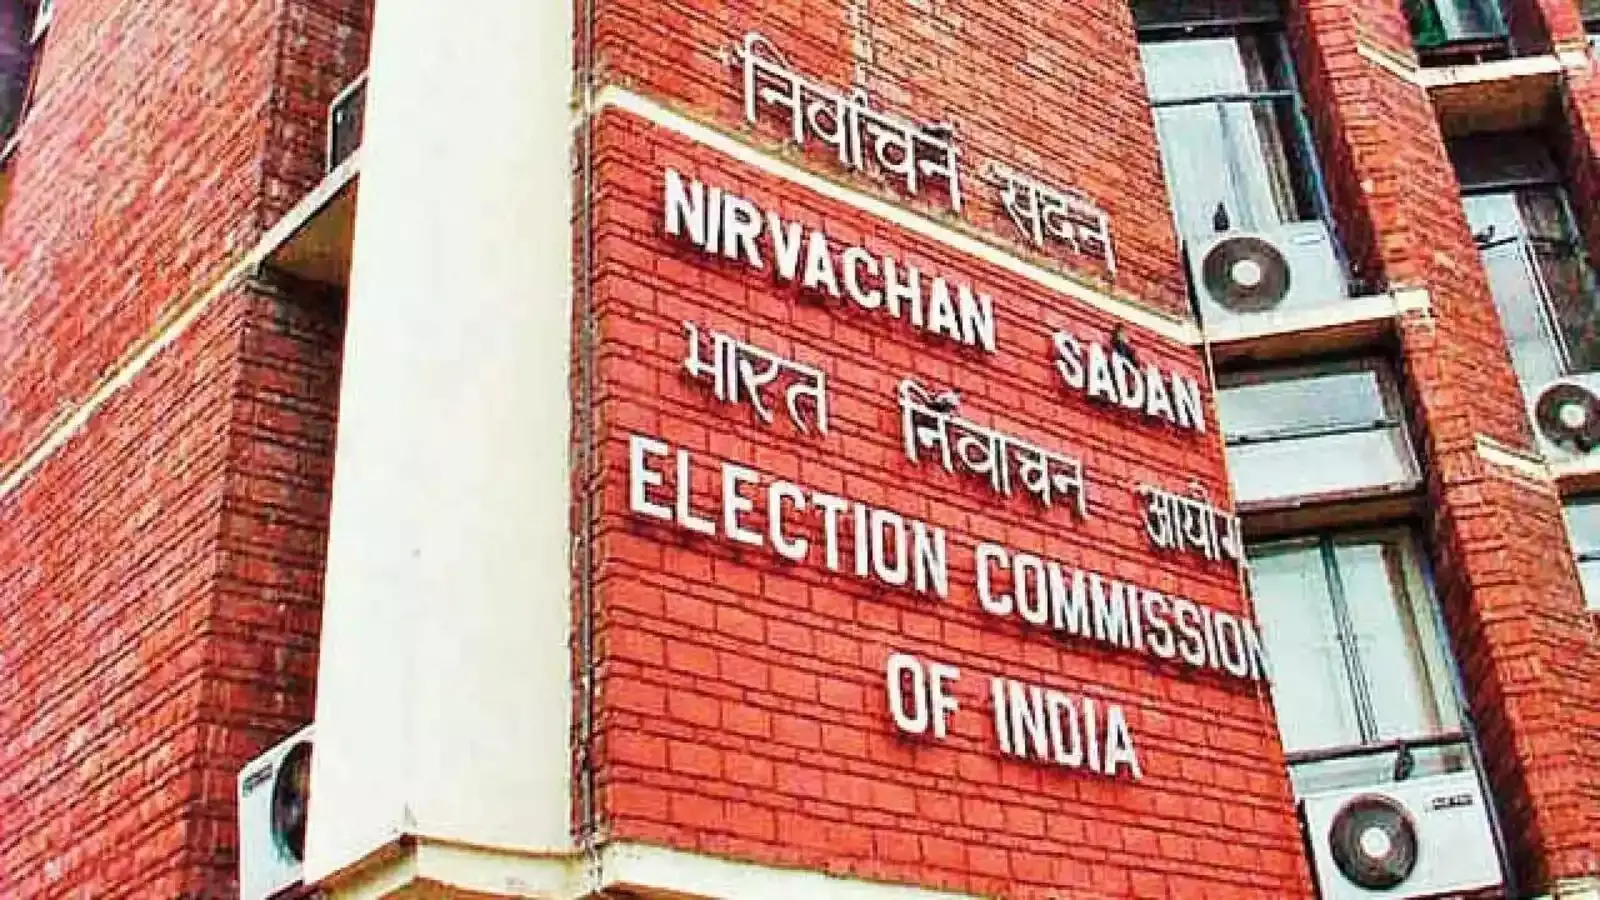 Congress accuses Election Commission of bias over notice on the partys corruption rate card advertisements in Karnataka